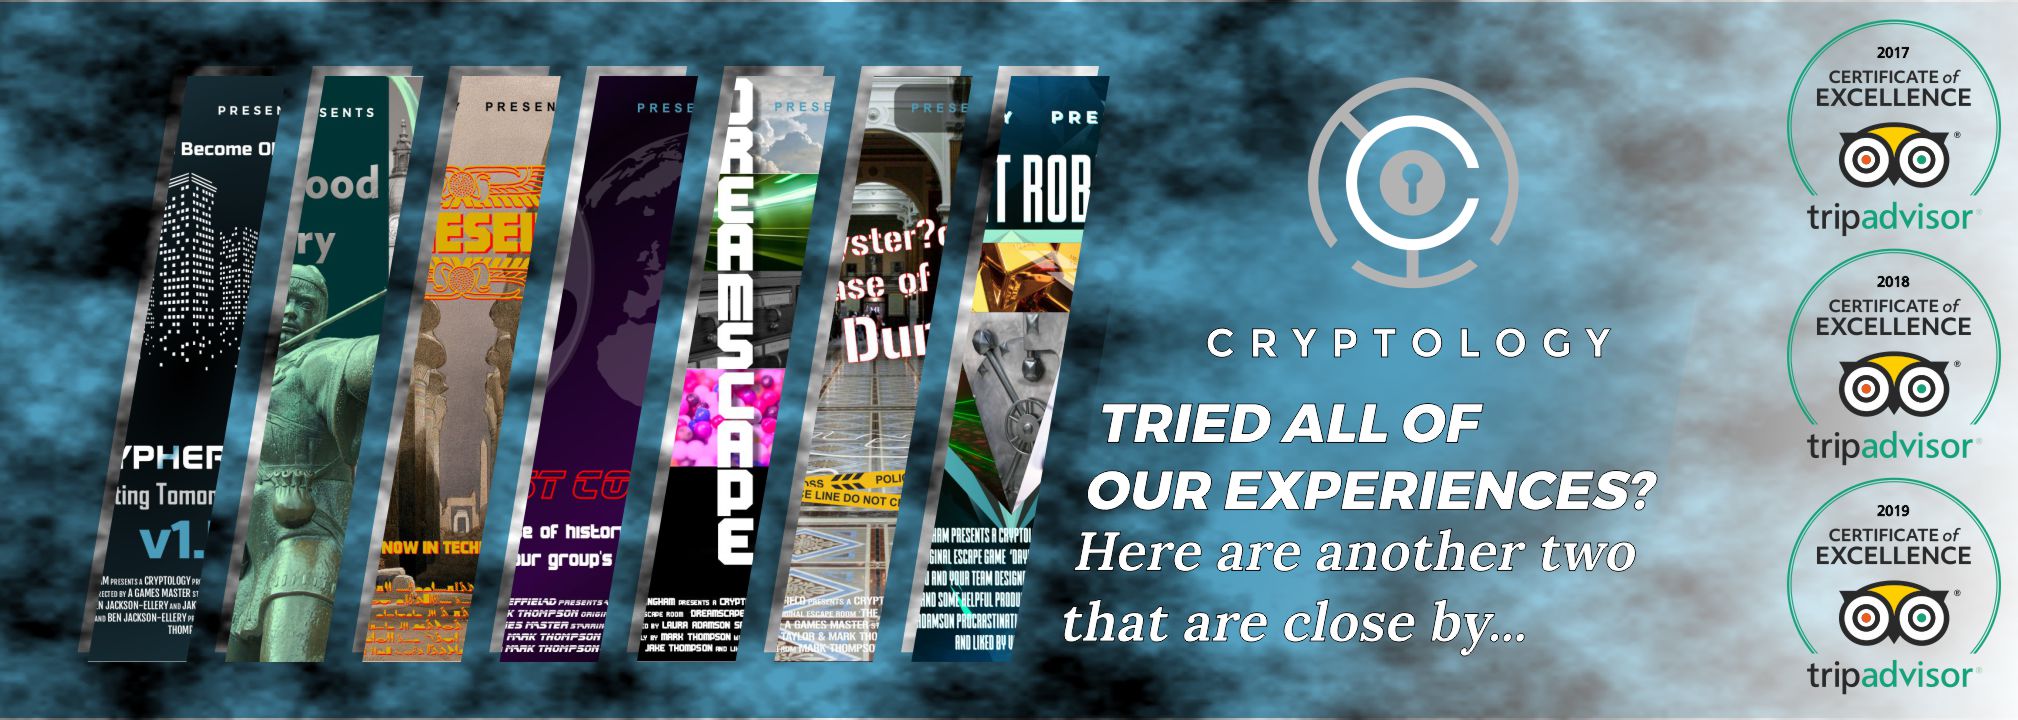 Cryptology Escape Rooms Recommends...